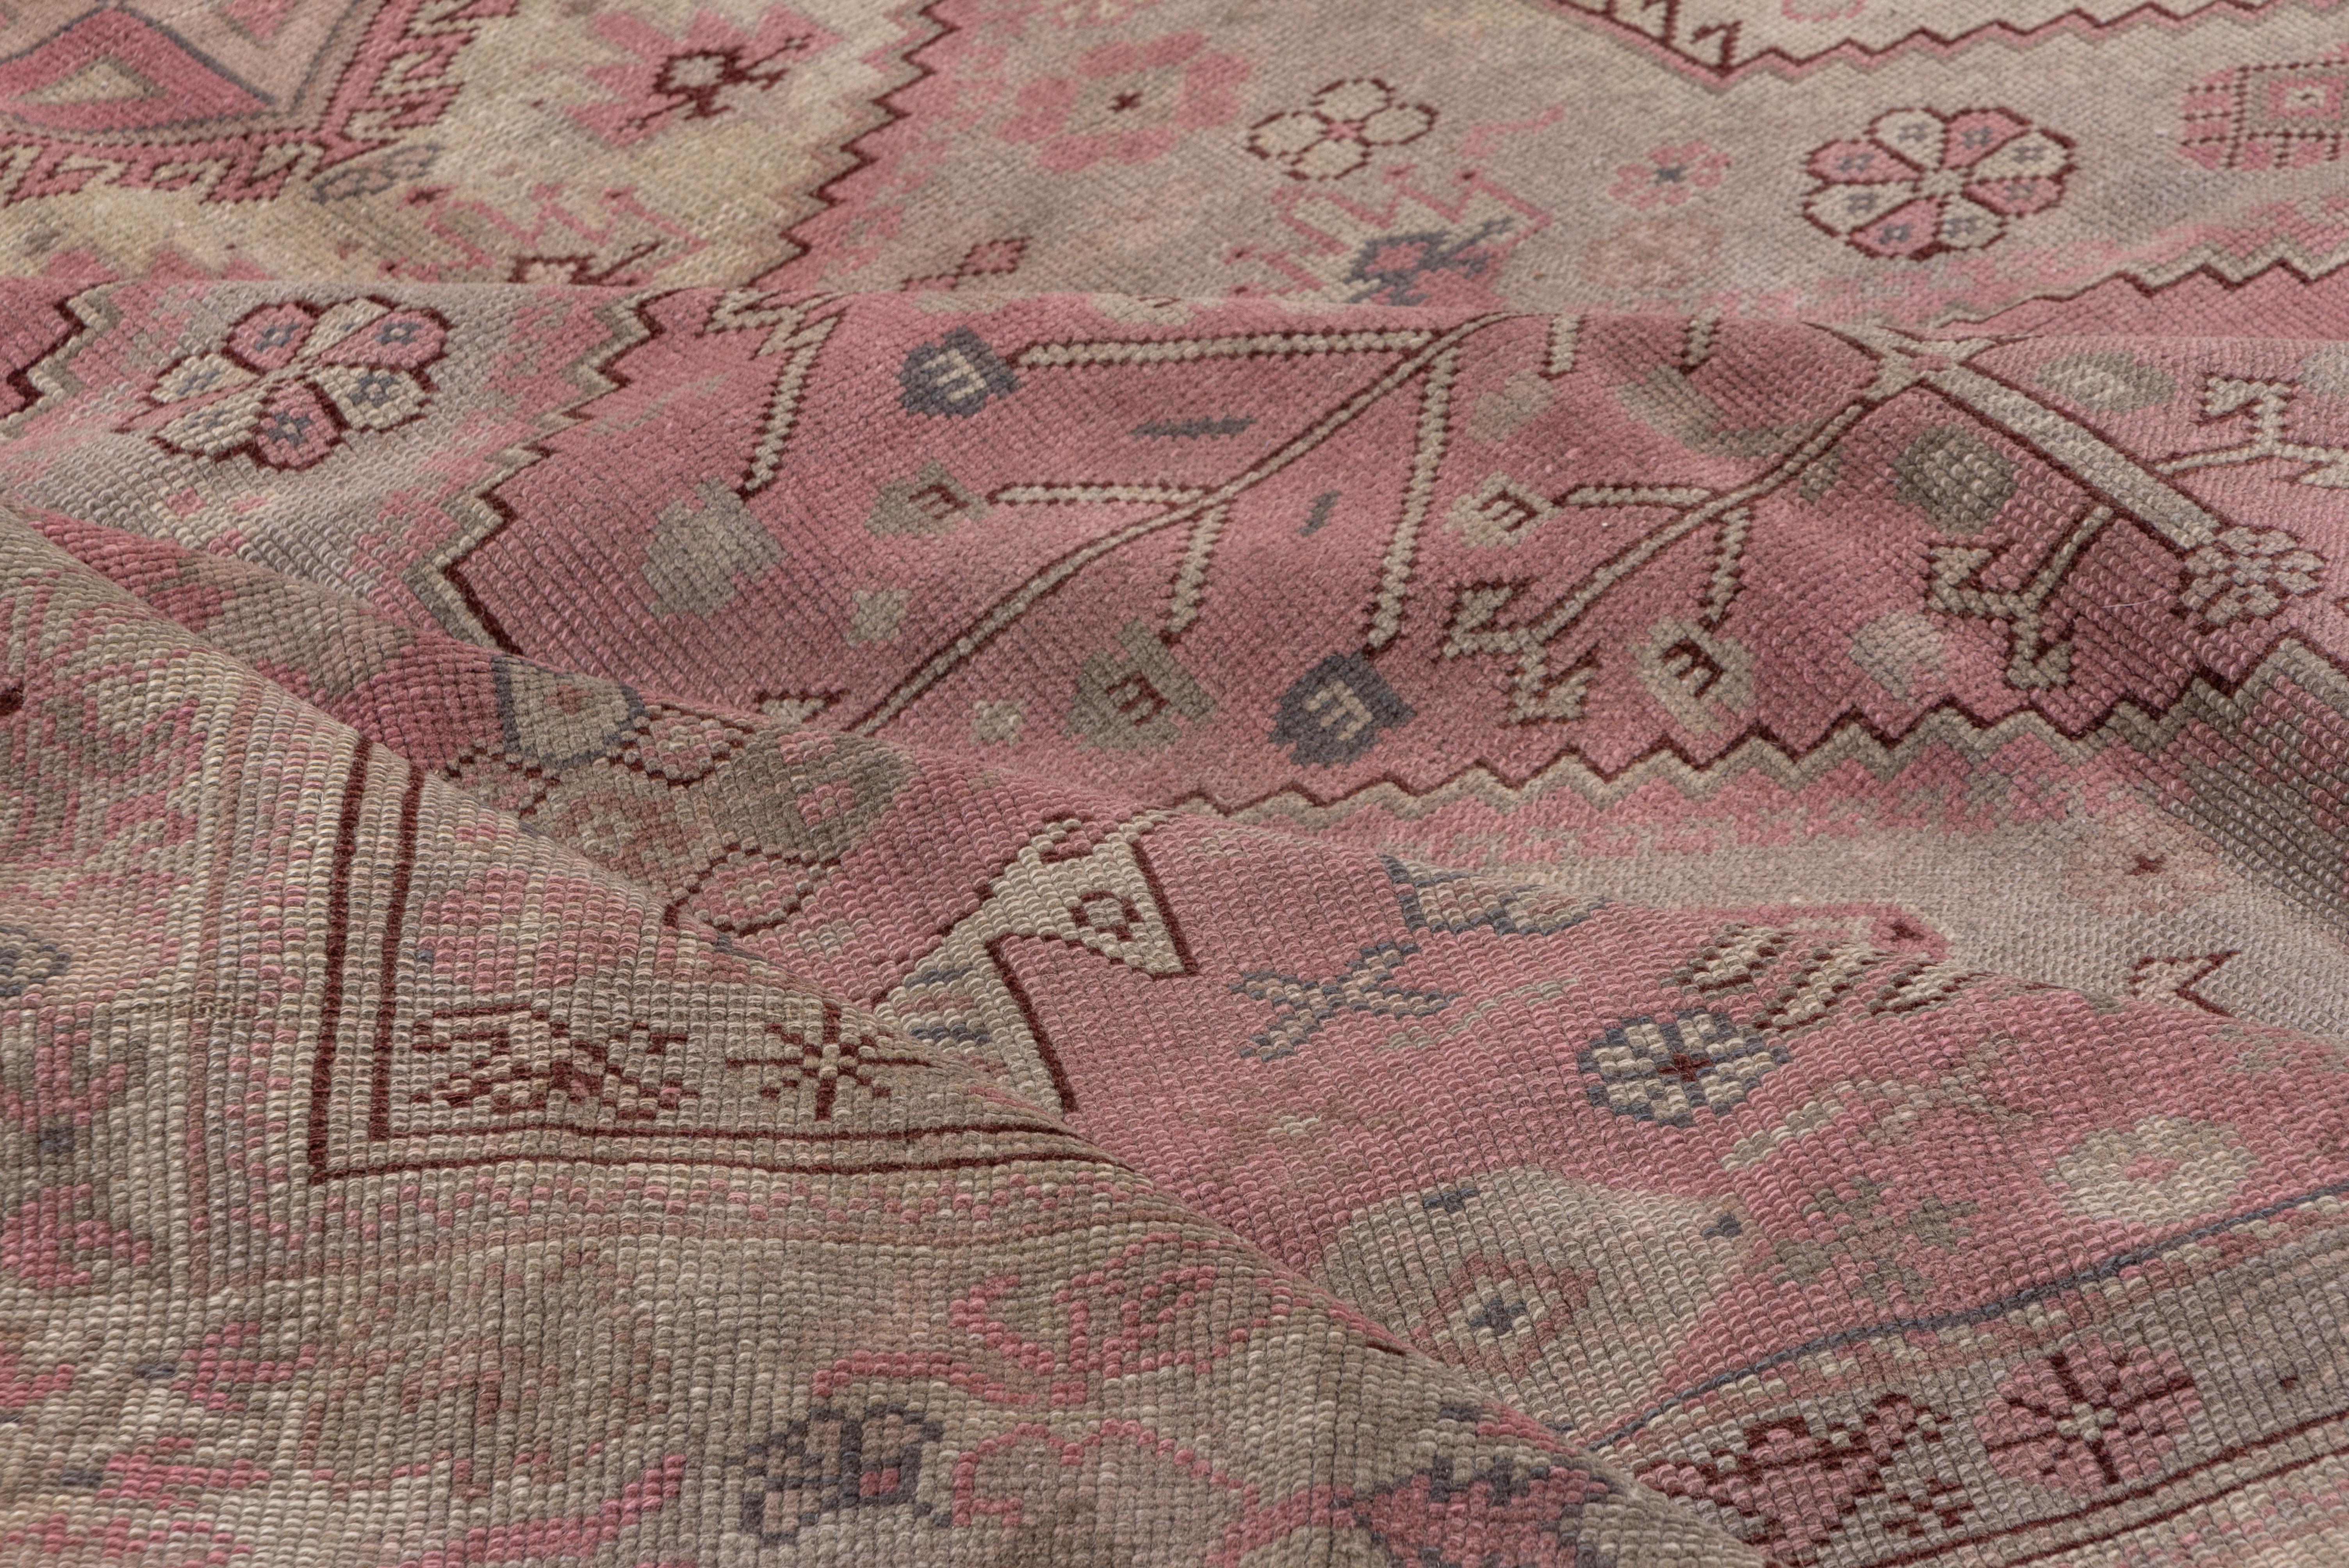 A primarily light toned Anatolian carpet with a geometric pattern of stepped hexagons and side fillers in straw, light green and pink, with horses in the corners and birds in a Persian tribal style scattered about. The beige border shows progressive